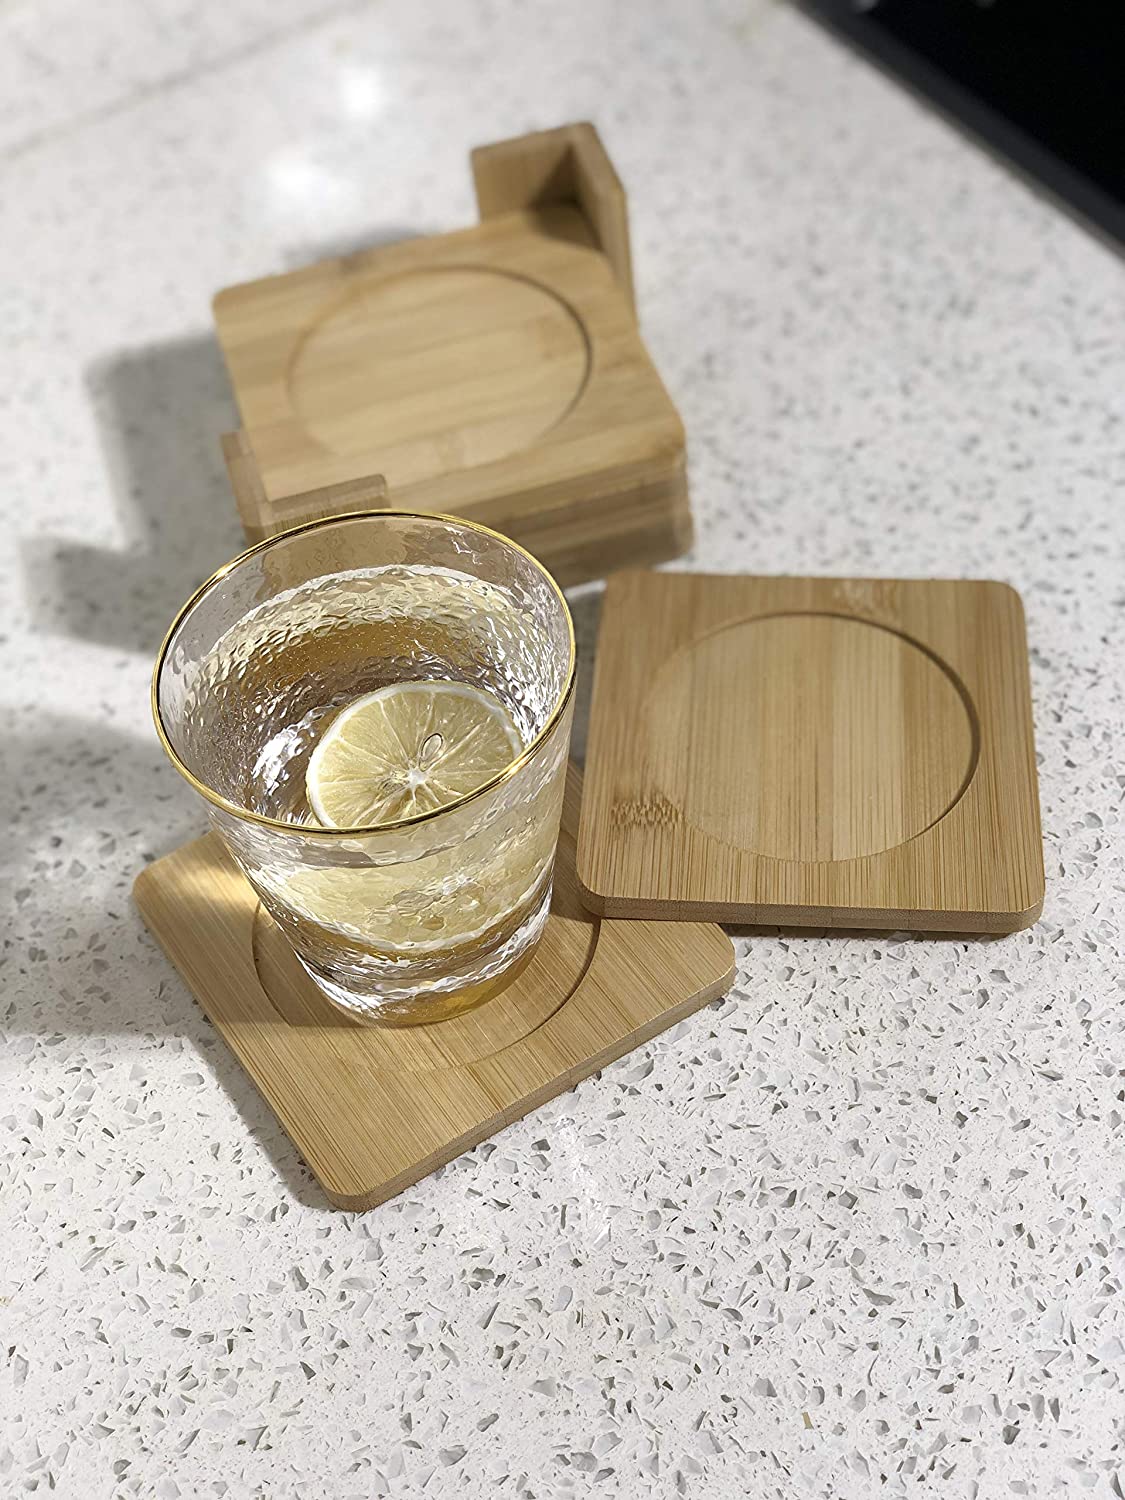 Coasters x 6 Bamboo Square Coaster Set in Bamboo with Coaster Holder HYGRAD BUILT TO SURVIVE